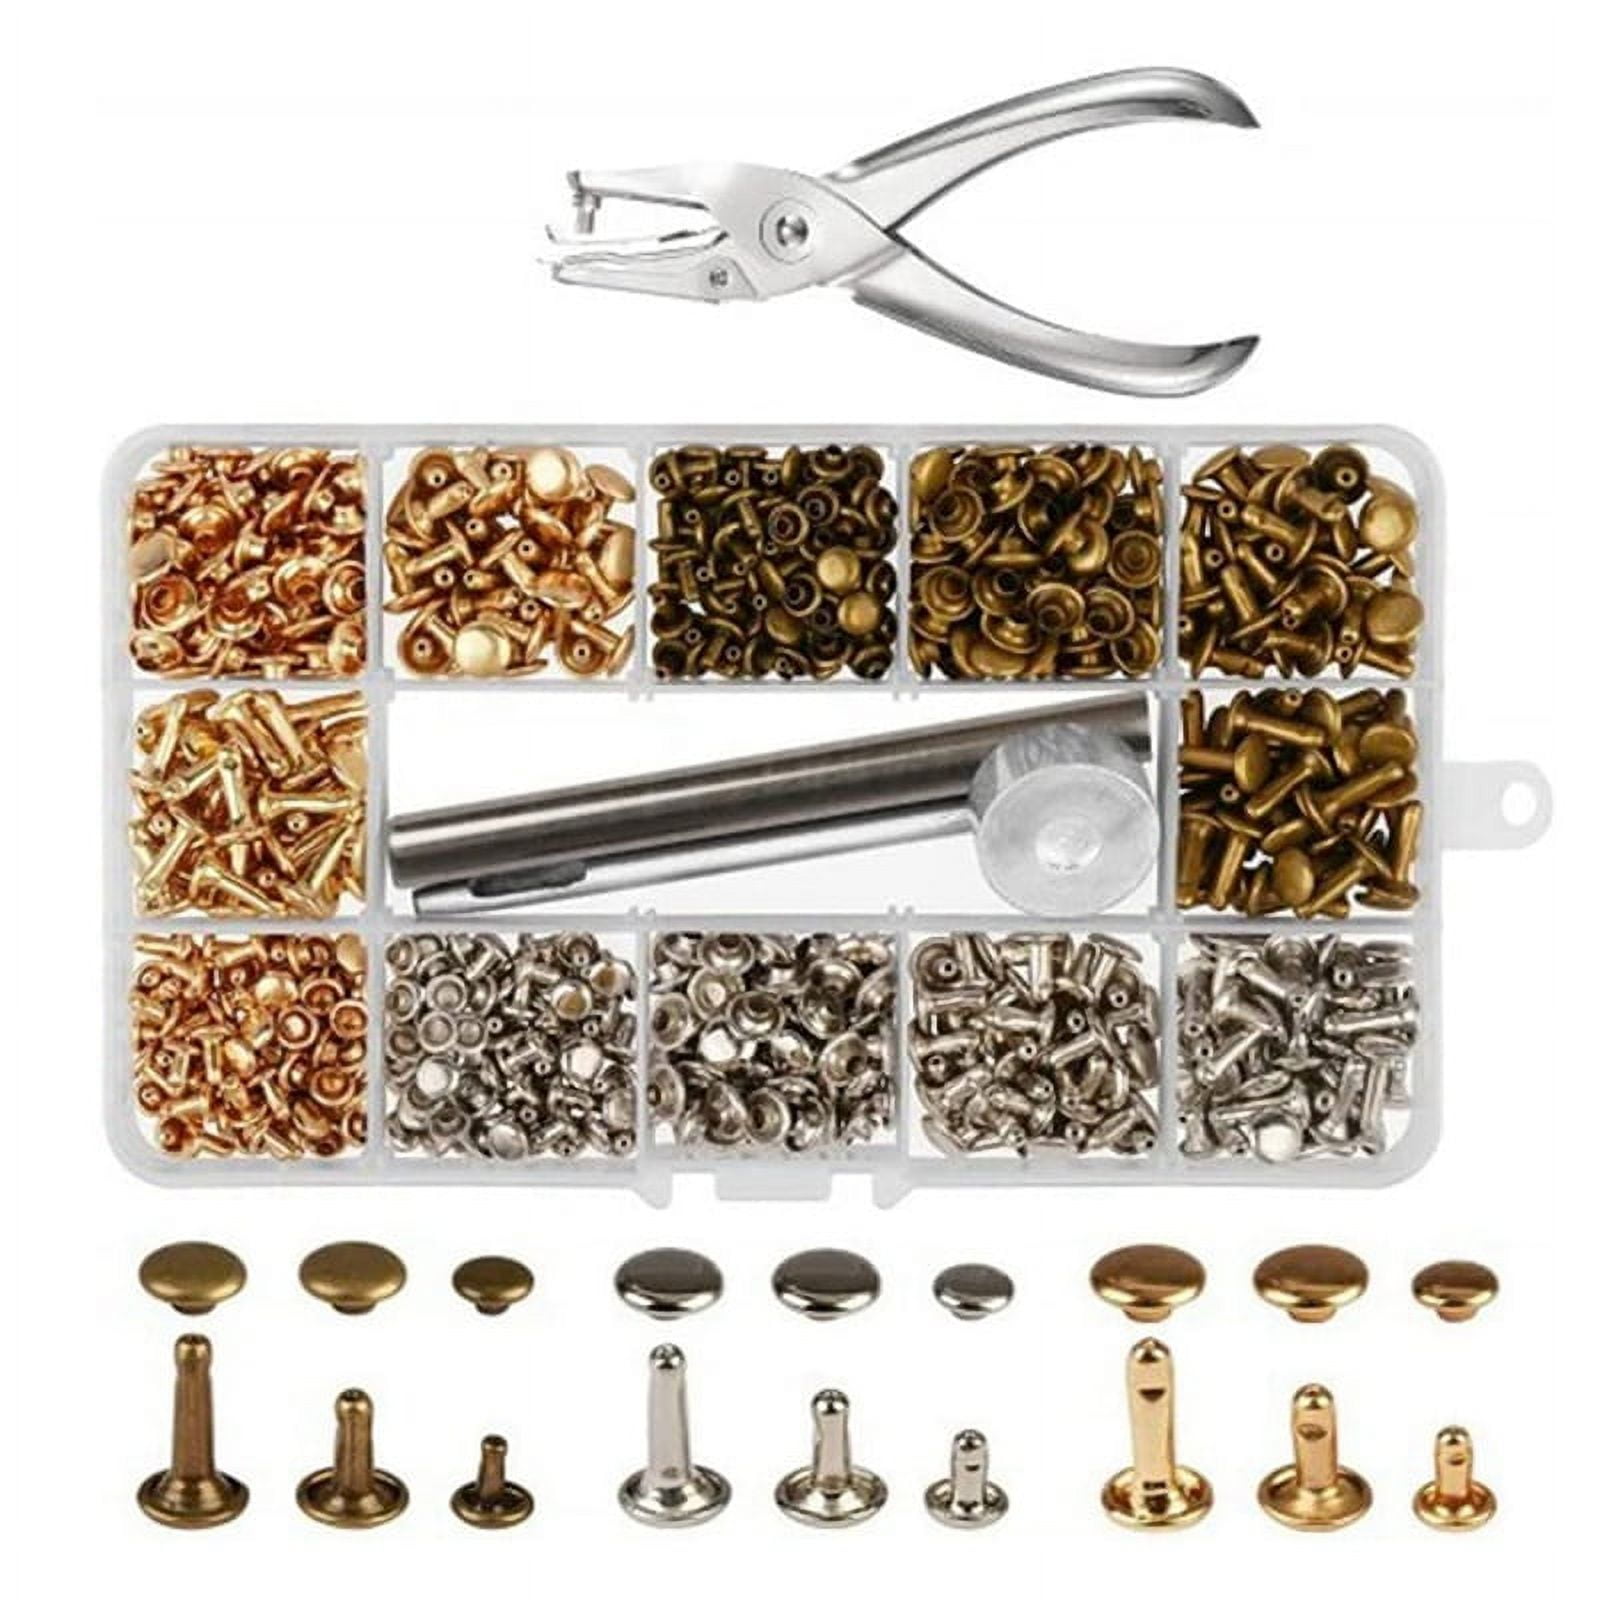  uxcell 120 Set Leather Rivets Kit 4 Colors 8mm Metal Studs  Double Cap Rivet with 3PCS Setting Tools Rivets for Leather Fabric Repair  Decoration : Arts, Crafts & Sewing